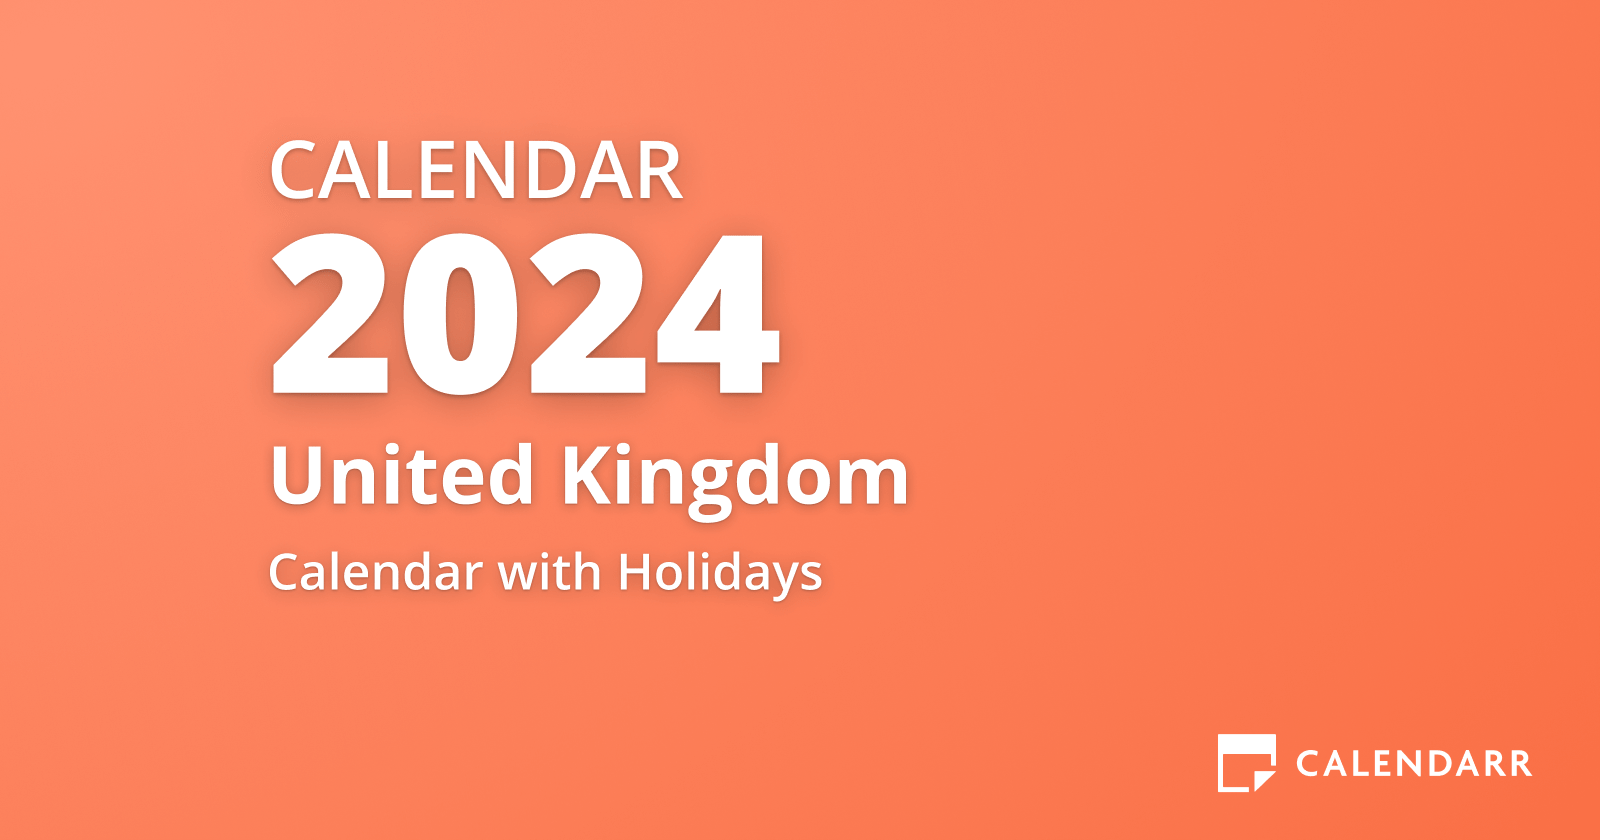 July 2024 Calendar of the United Kingdom (July 2024 Holidays and